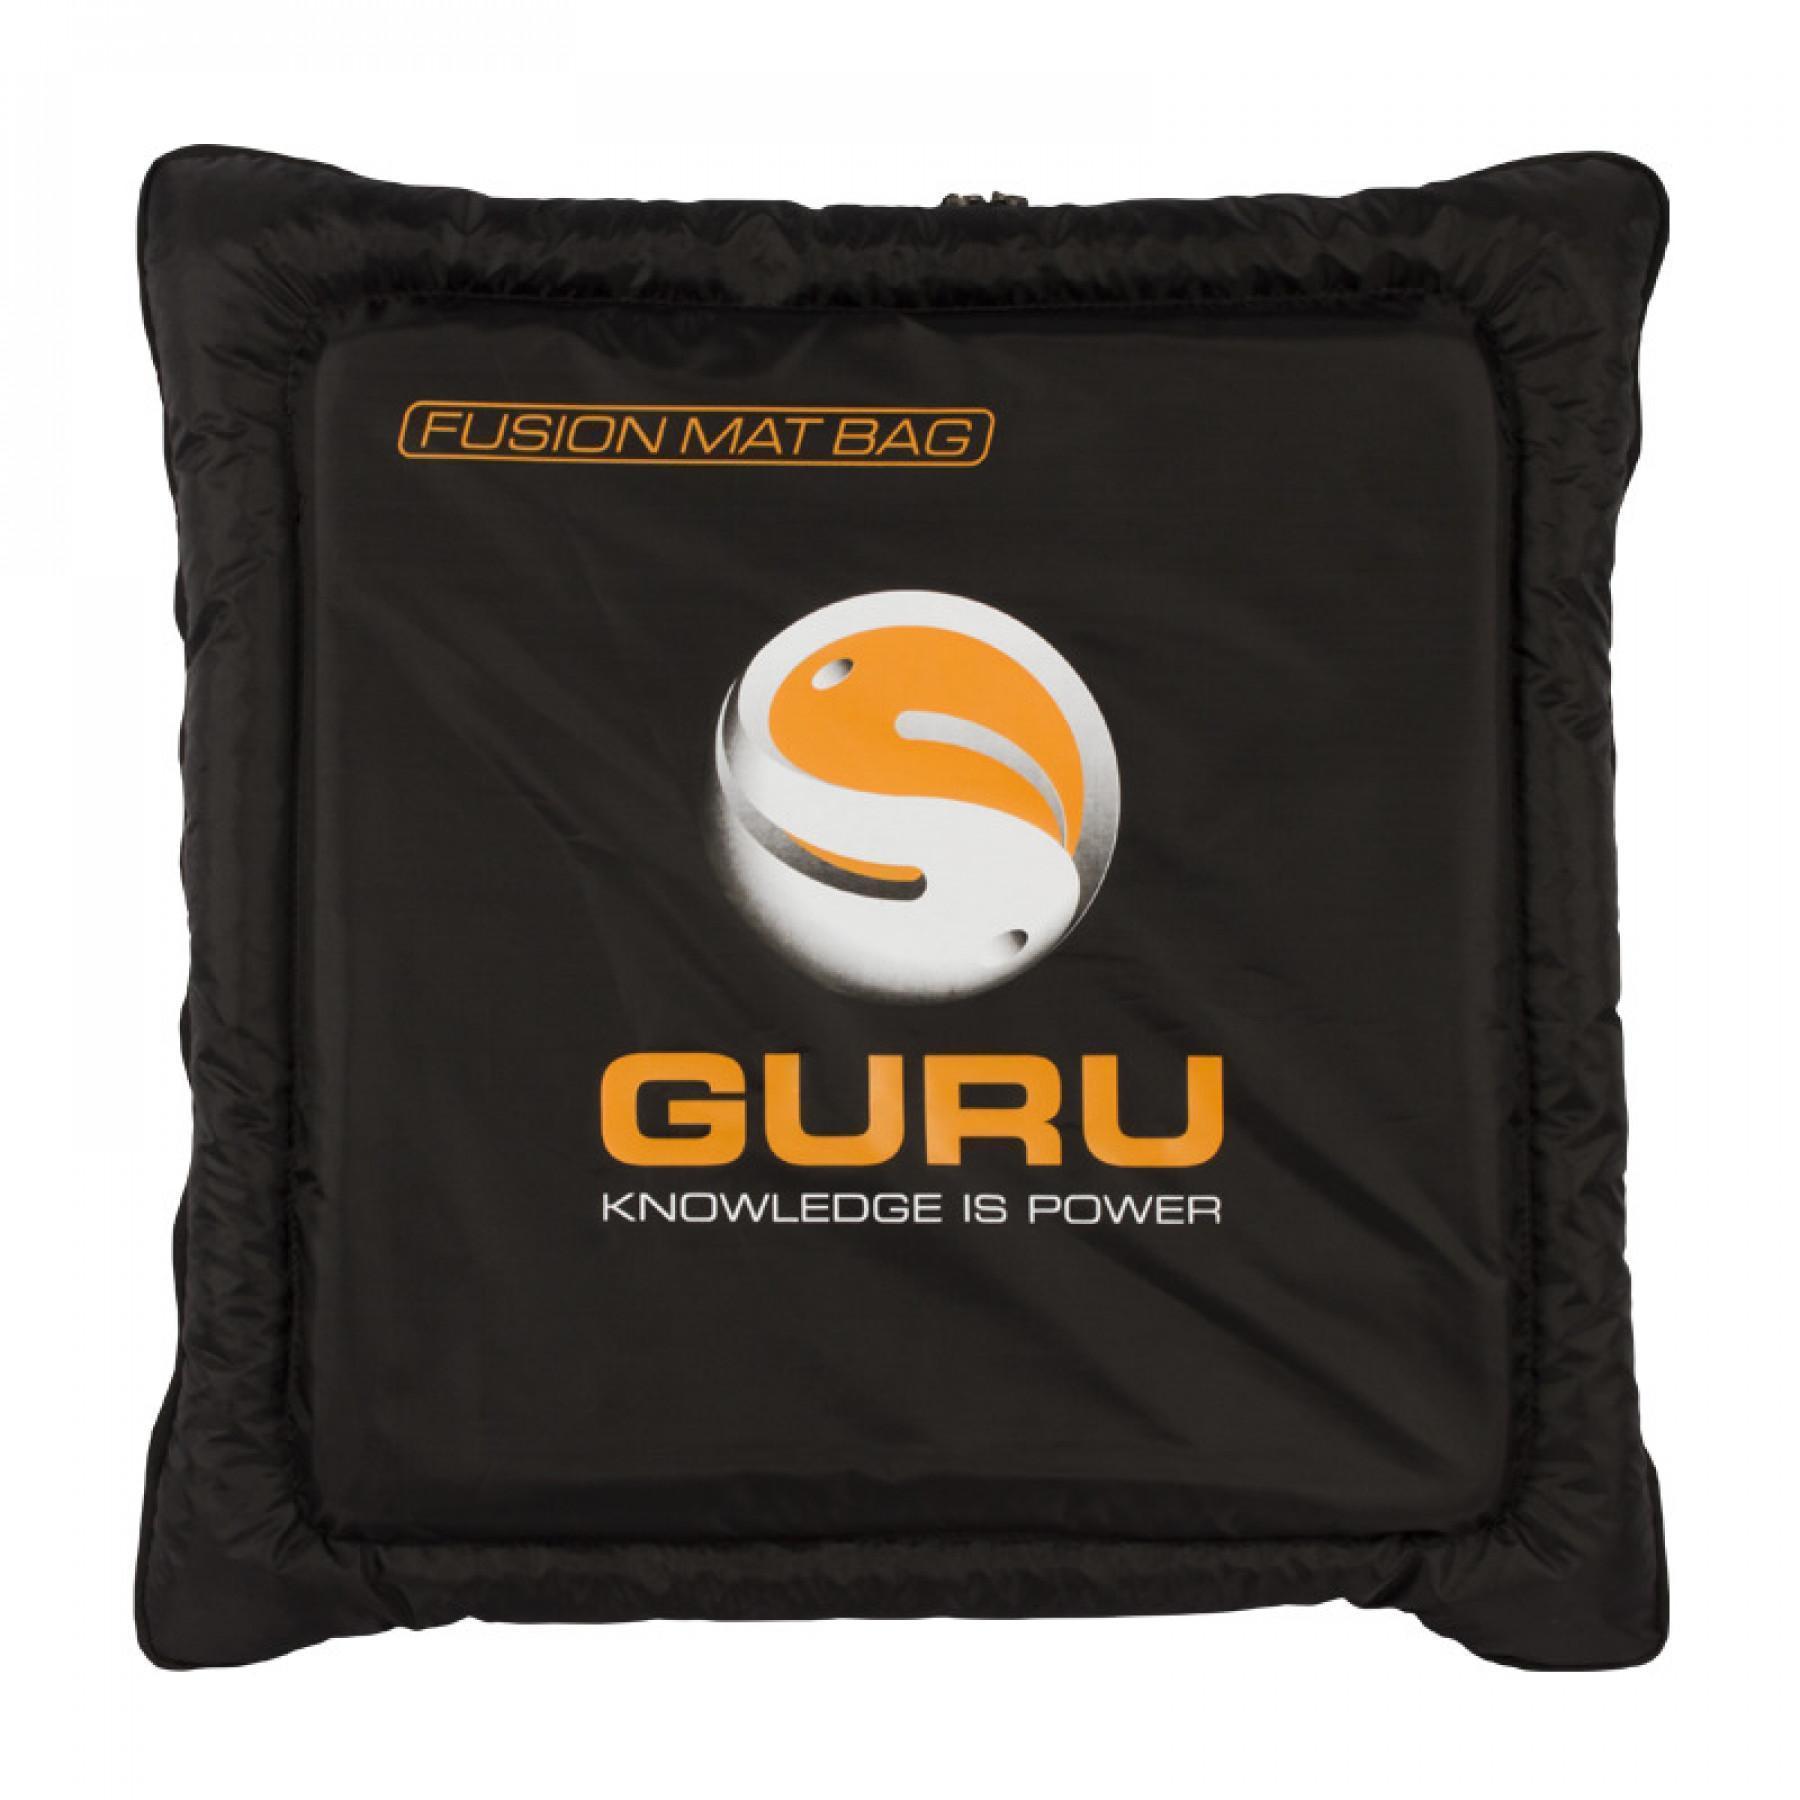 NEW FUSION MAT BAG 👏🐟🎣  NEW FUSION MAT BAG 👏🐟🎣 We value fish safety  massively at Tackle Guru and the NEW Fusion Mat Bag reflects exactly that!  Whether you're a super